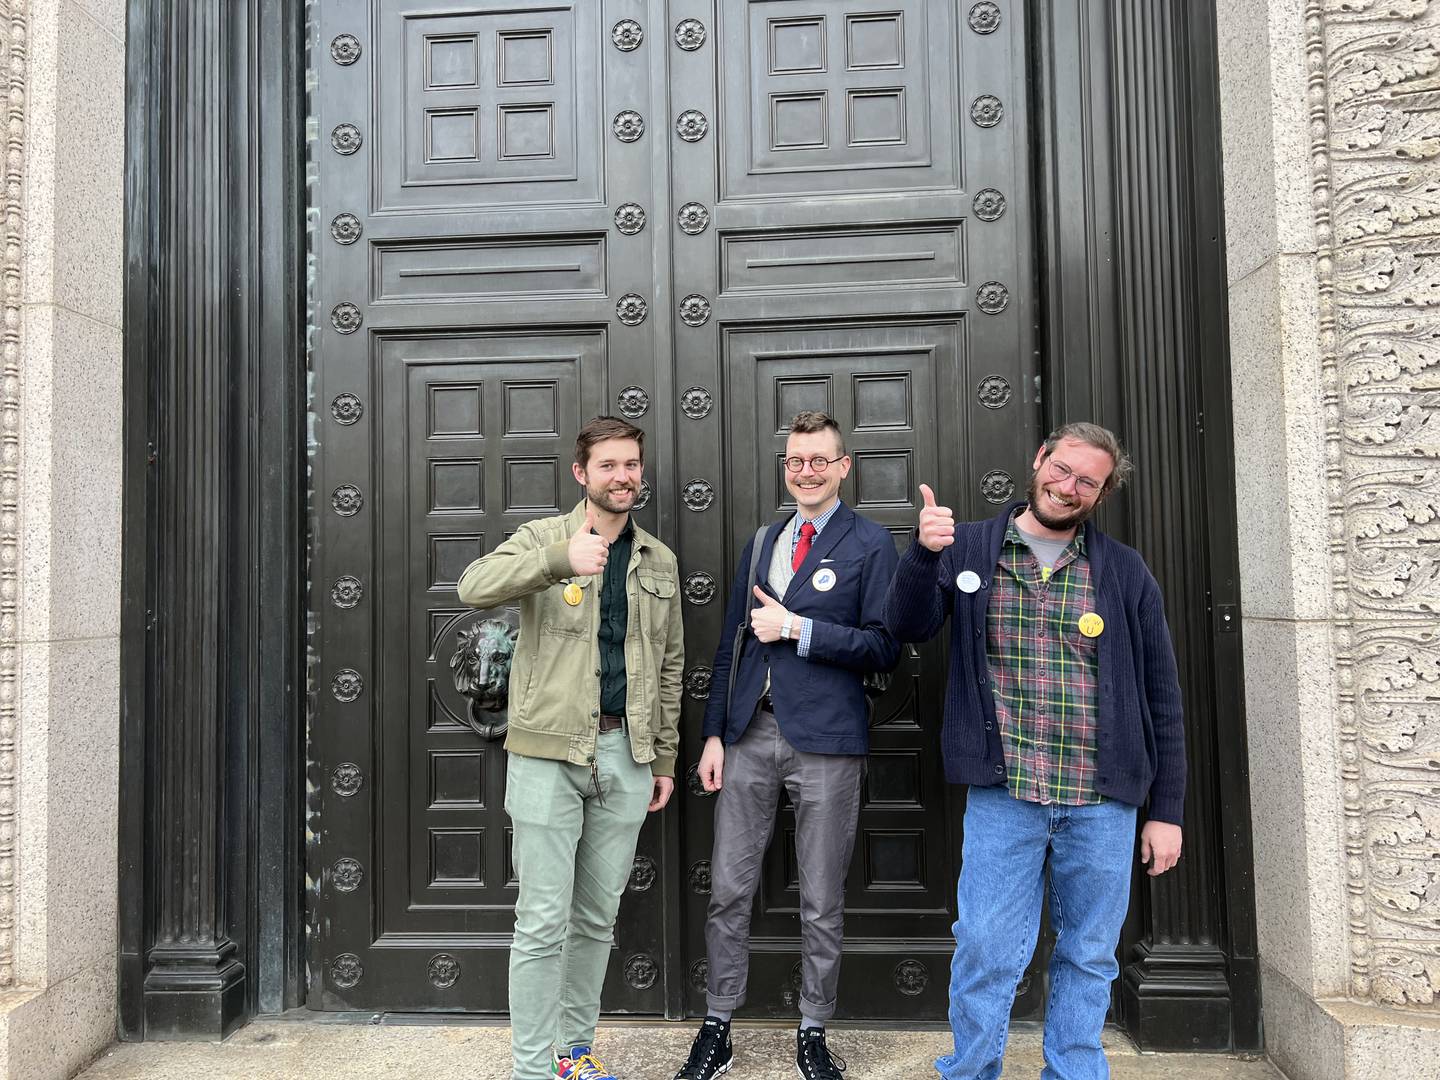 Walters Museum employees after they reached an election agreement. They have been for two years. From left to right: Garrett Stralnic, Gregory Bailey, and Will Hays